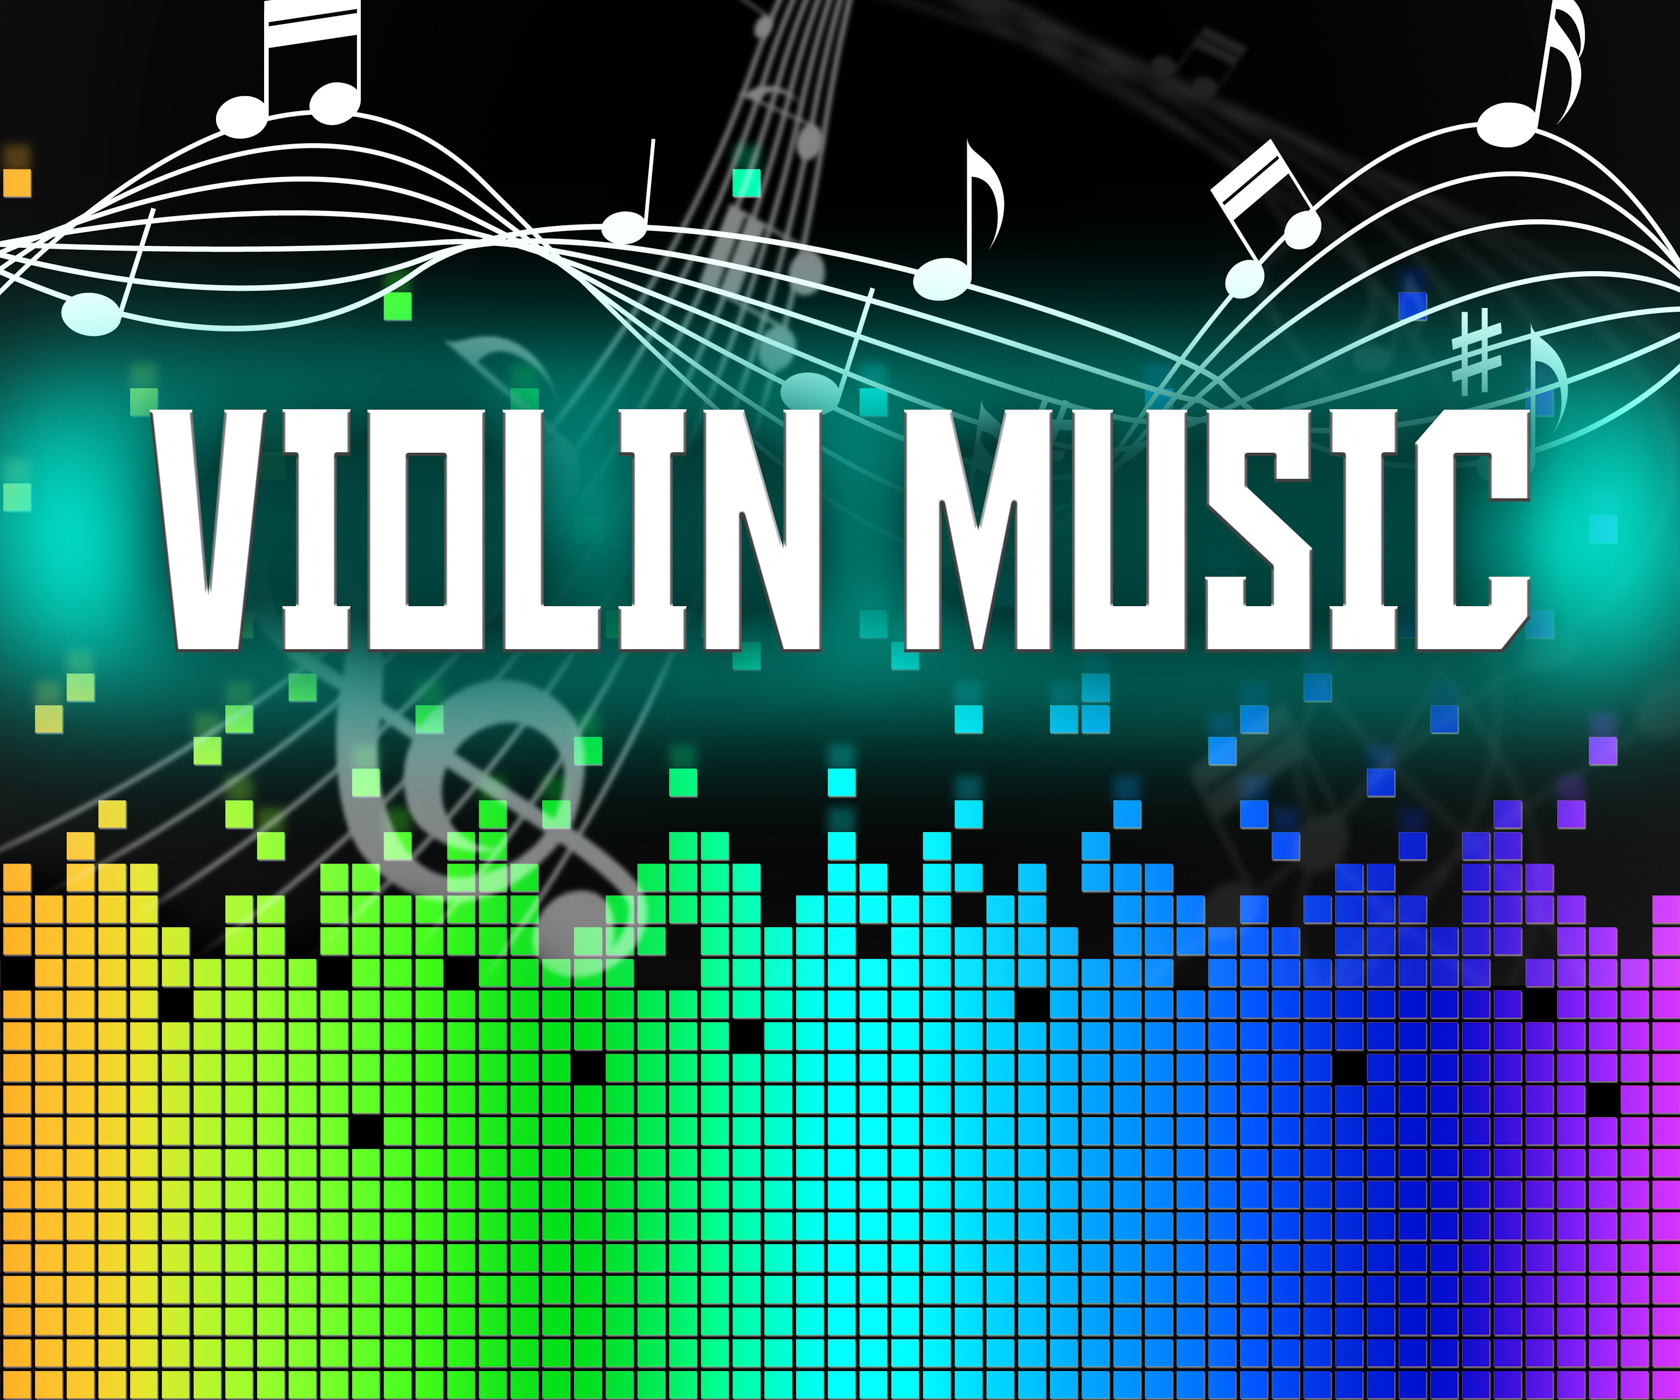 Violin music indicates sound track and acoustic photo